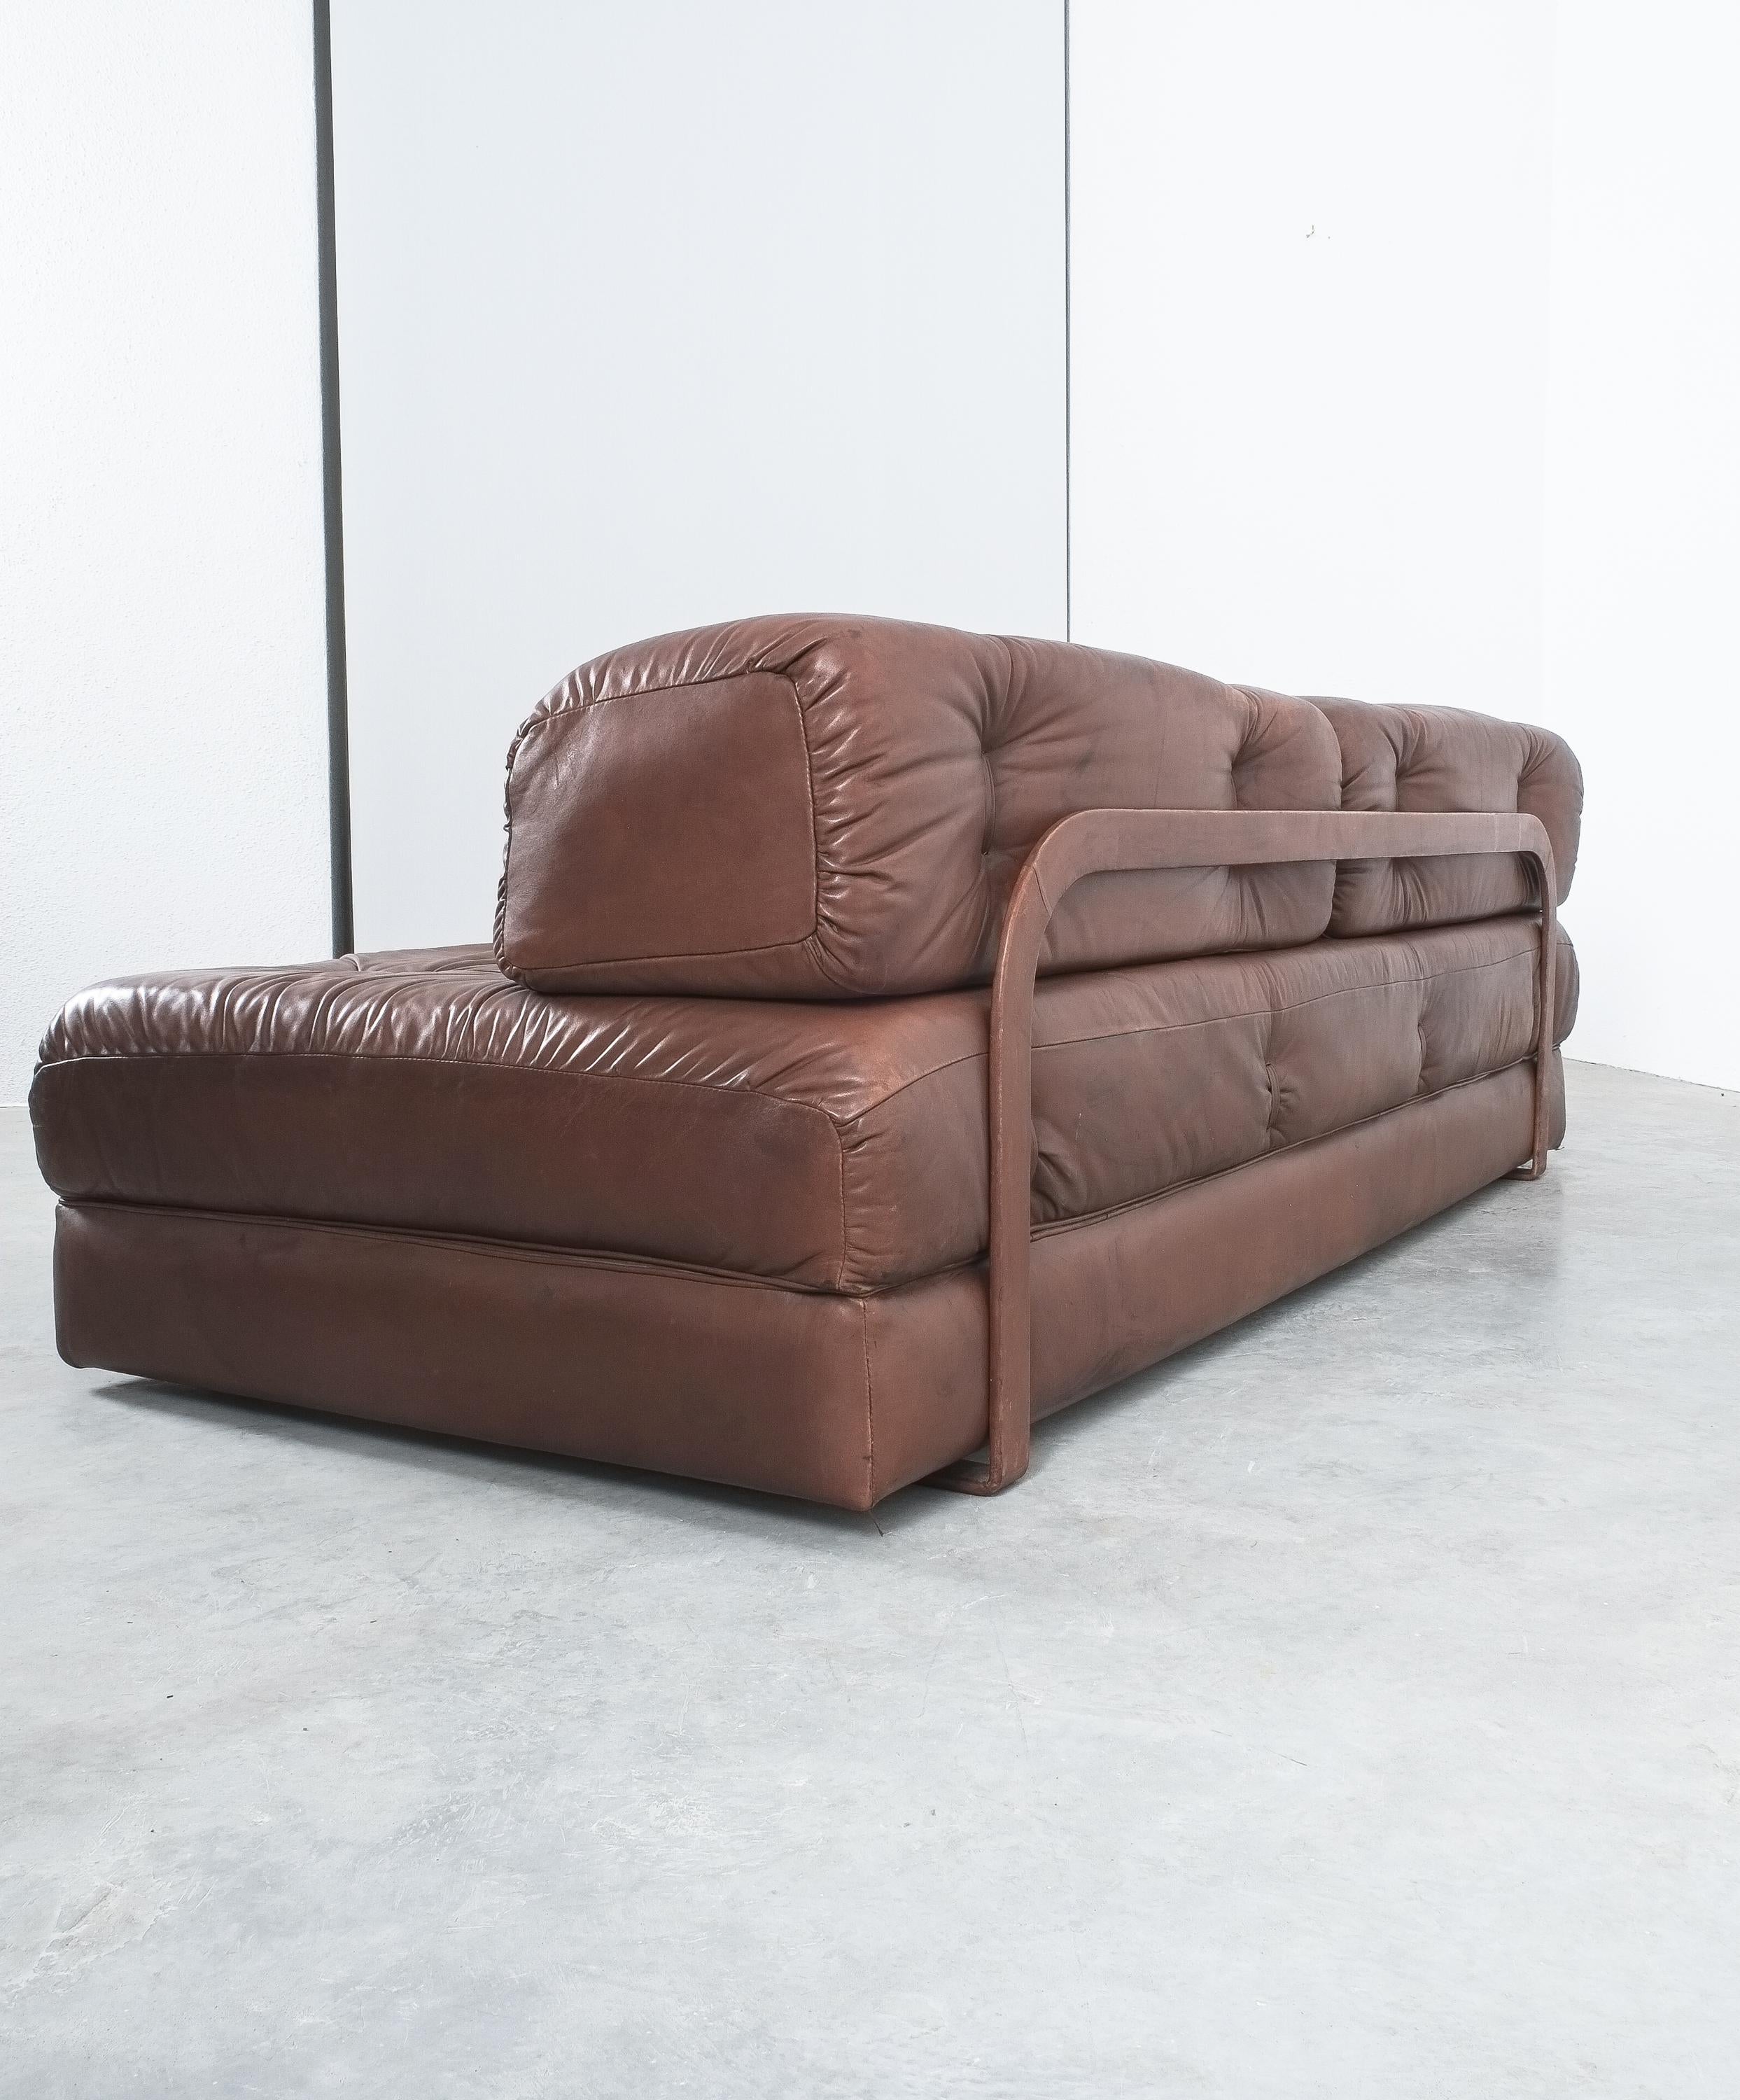 Steel Wittmann Atrium Sofa and Two Chairs Brown Leather, Austria